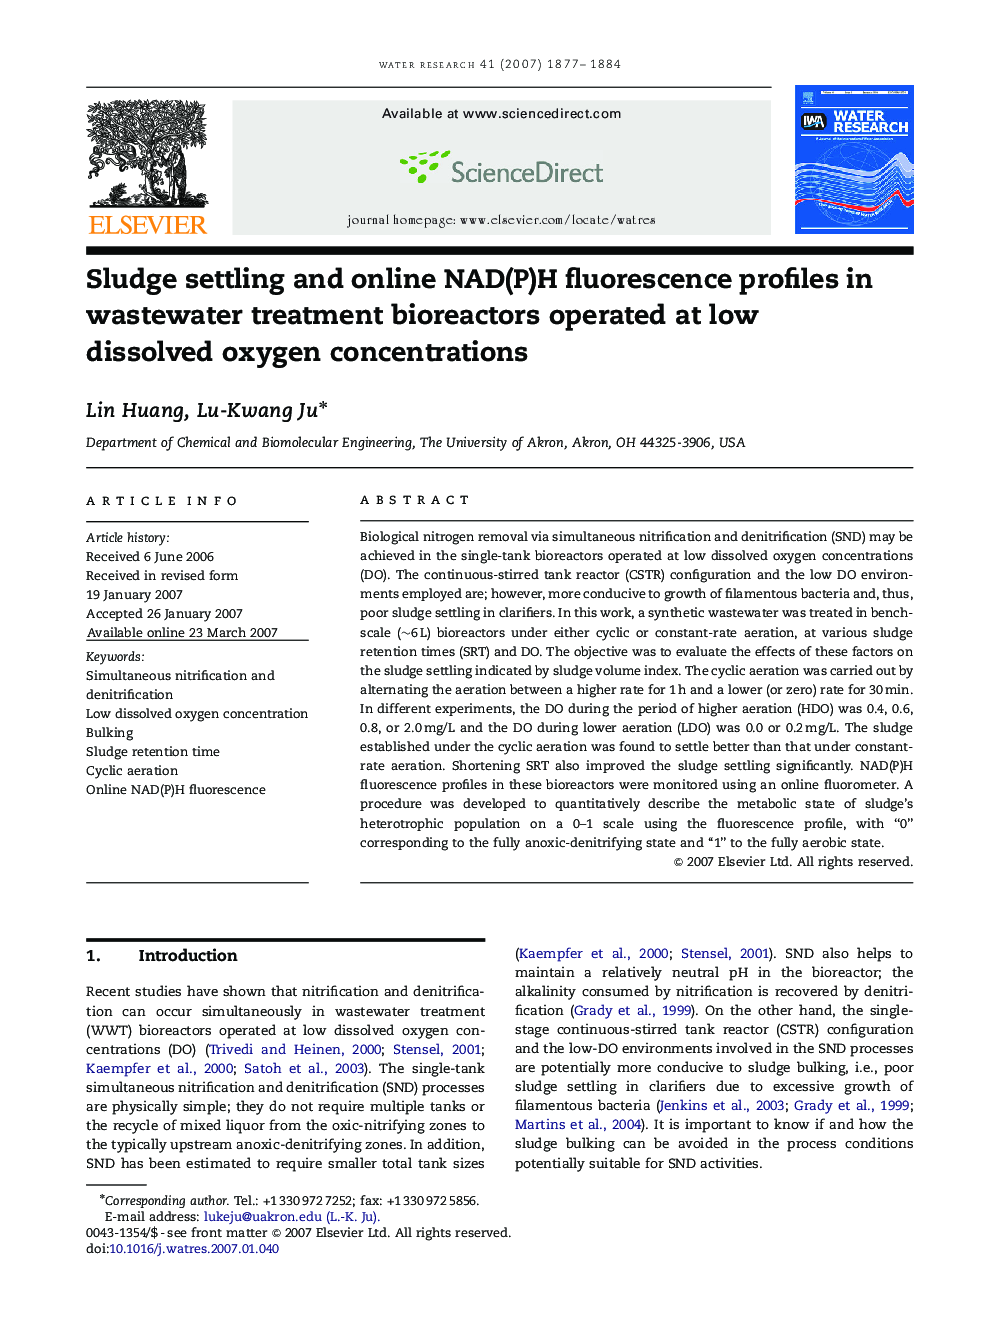 Sludge settling and online NAD(P)H fluorescence profiles in wastewater treatment bioreactors operated at low dissolved oxygen concentrations